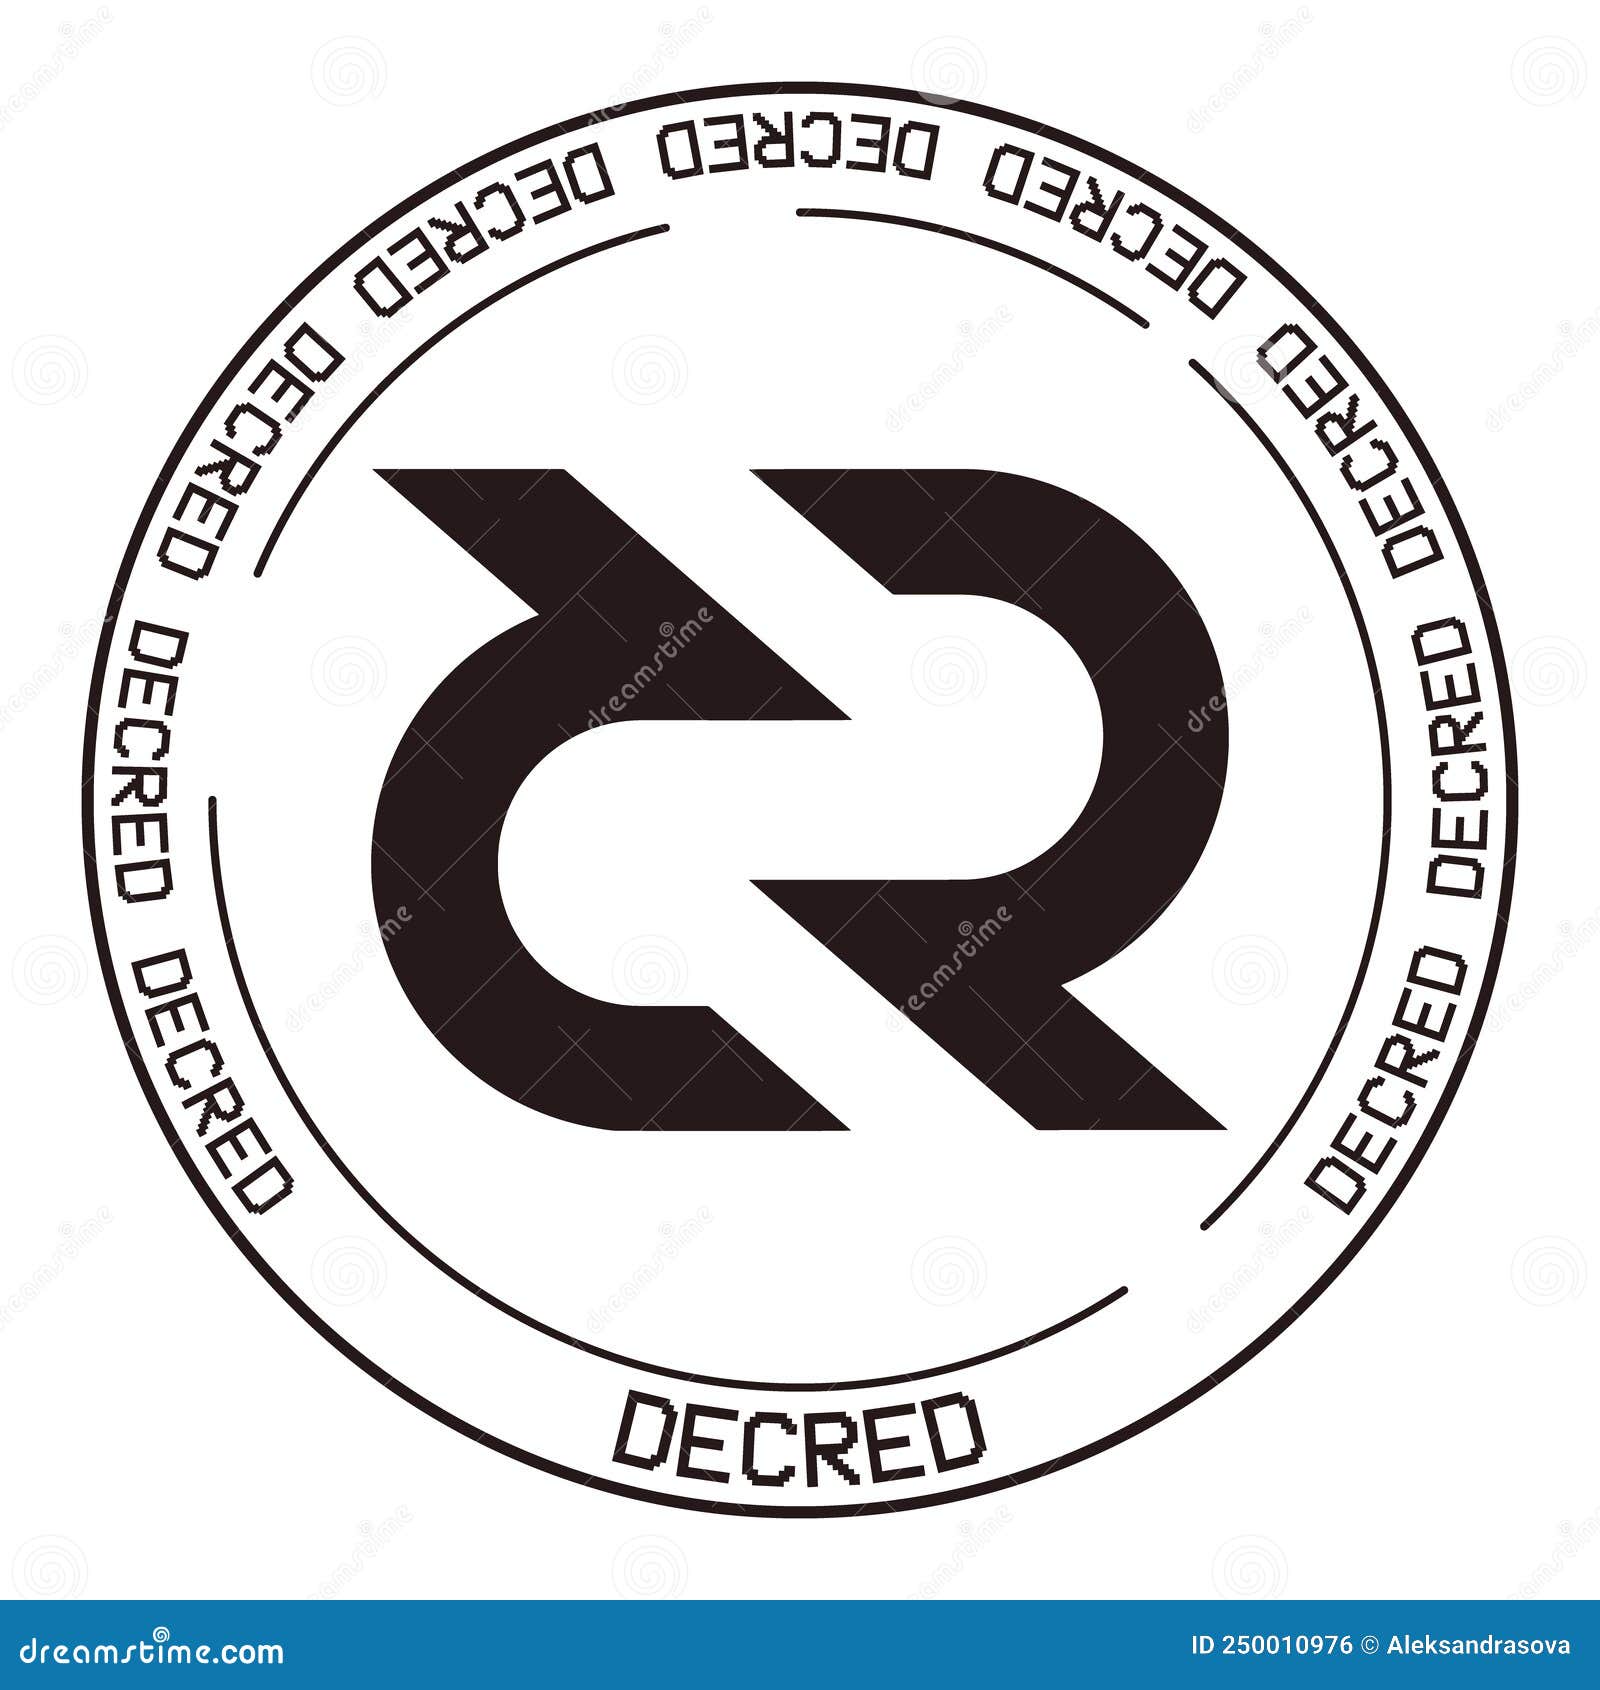 decred dcr cryptocurrency money logo.  cryptocurrency .